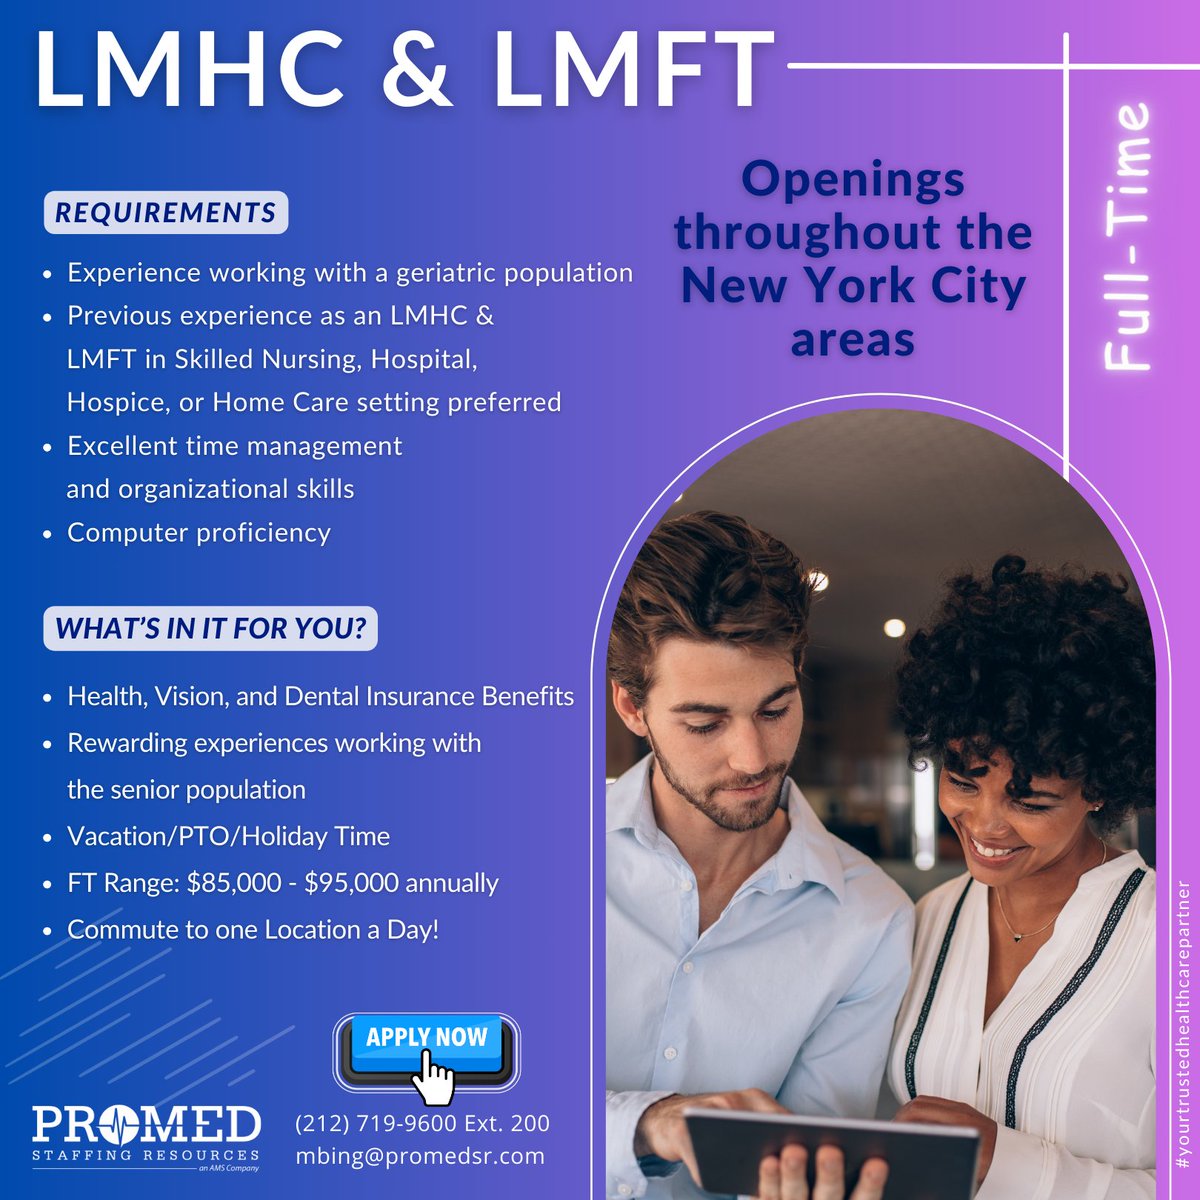 ProMed Staffing Resources invites experienced #LMHCs & #LMFTs to explore a variety of enriching roles. Connect with us at mbing@promedsr.com or call (212) 719-9600 EXT. 200

#licensedclinicalsocialworker #lmhcjobs #lmftjobs  #nonclinicalroles #alliedhealth #socialwork #promedsr